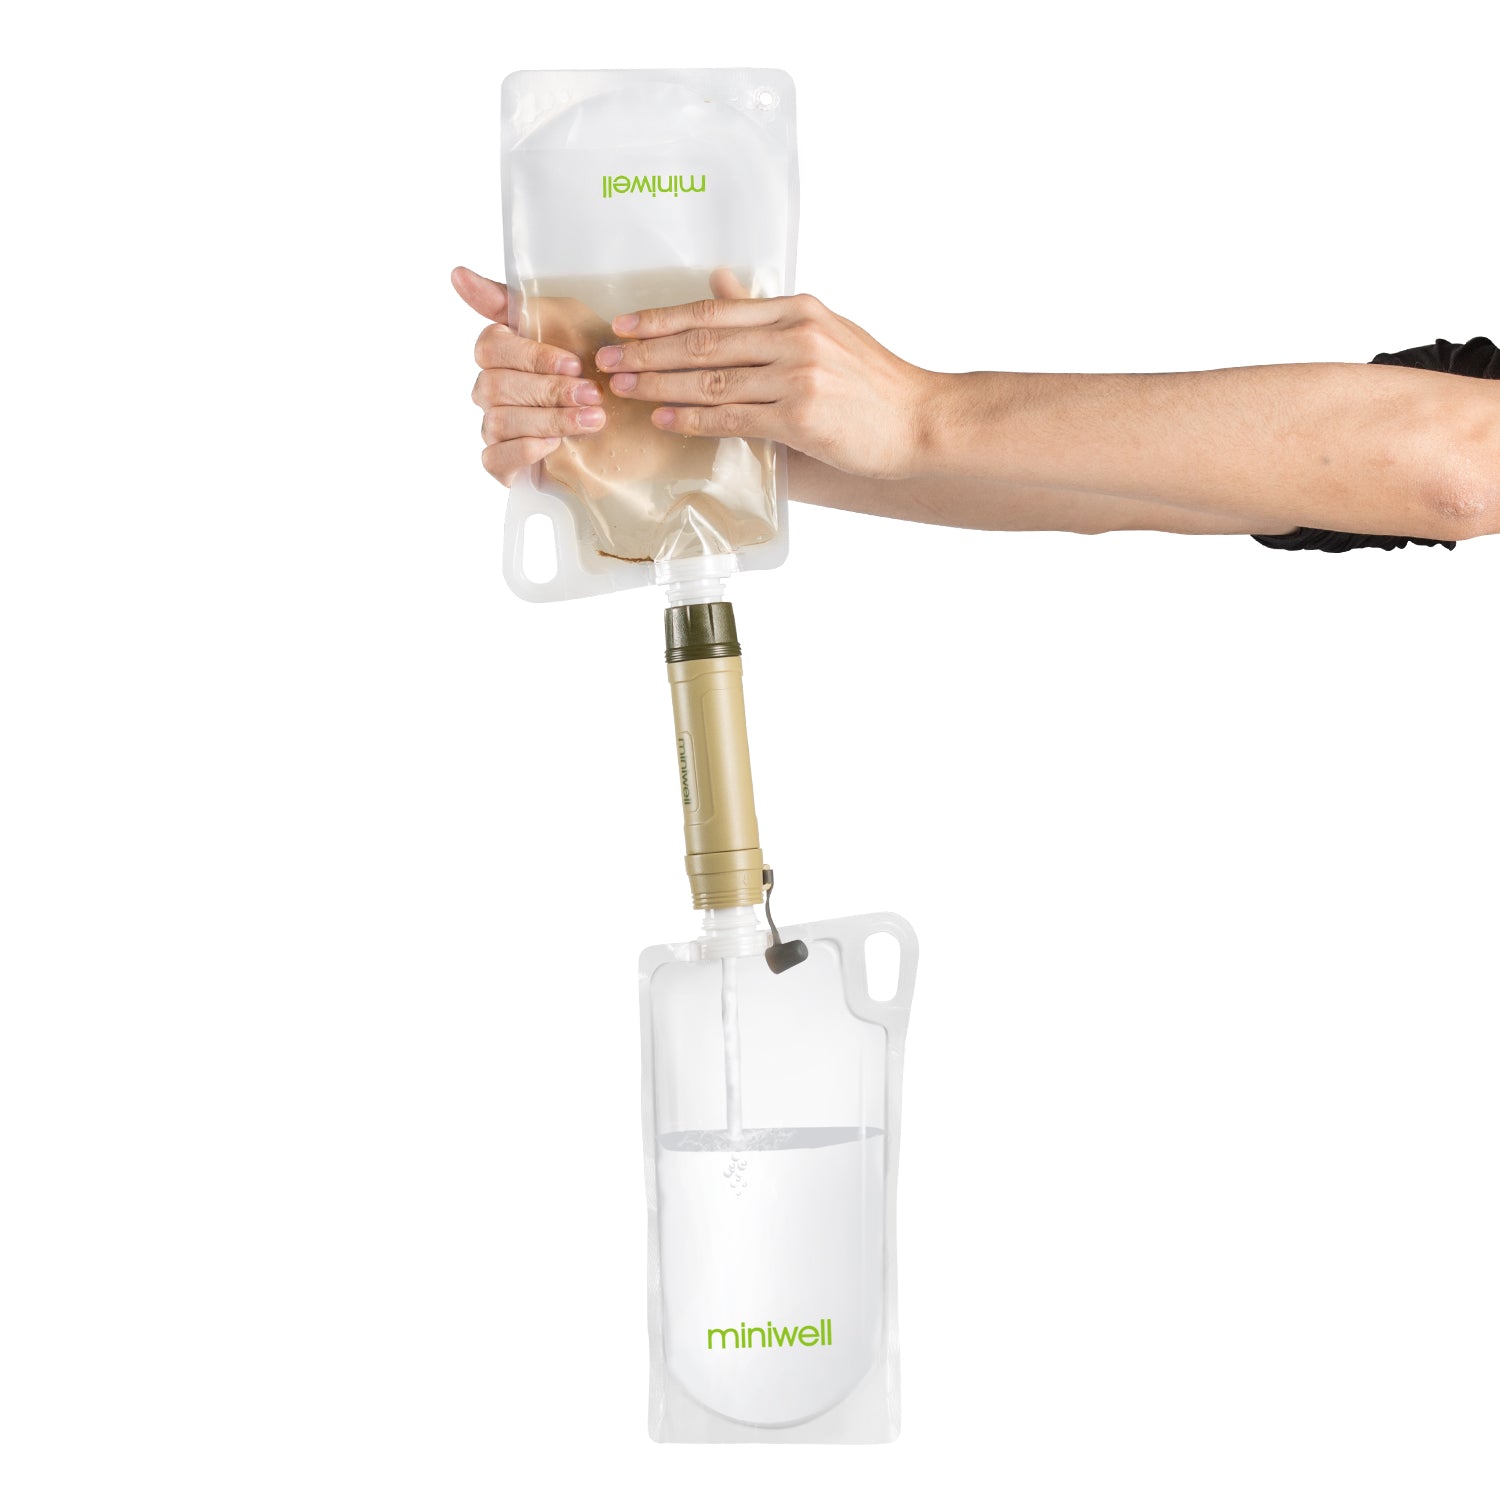 Emergency Portable Water Ultra Filter